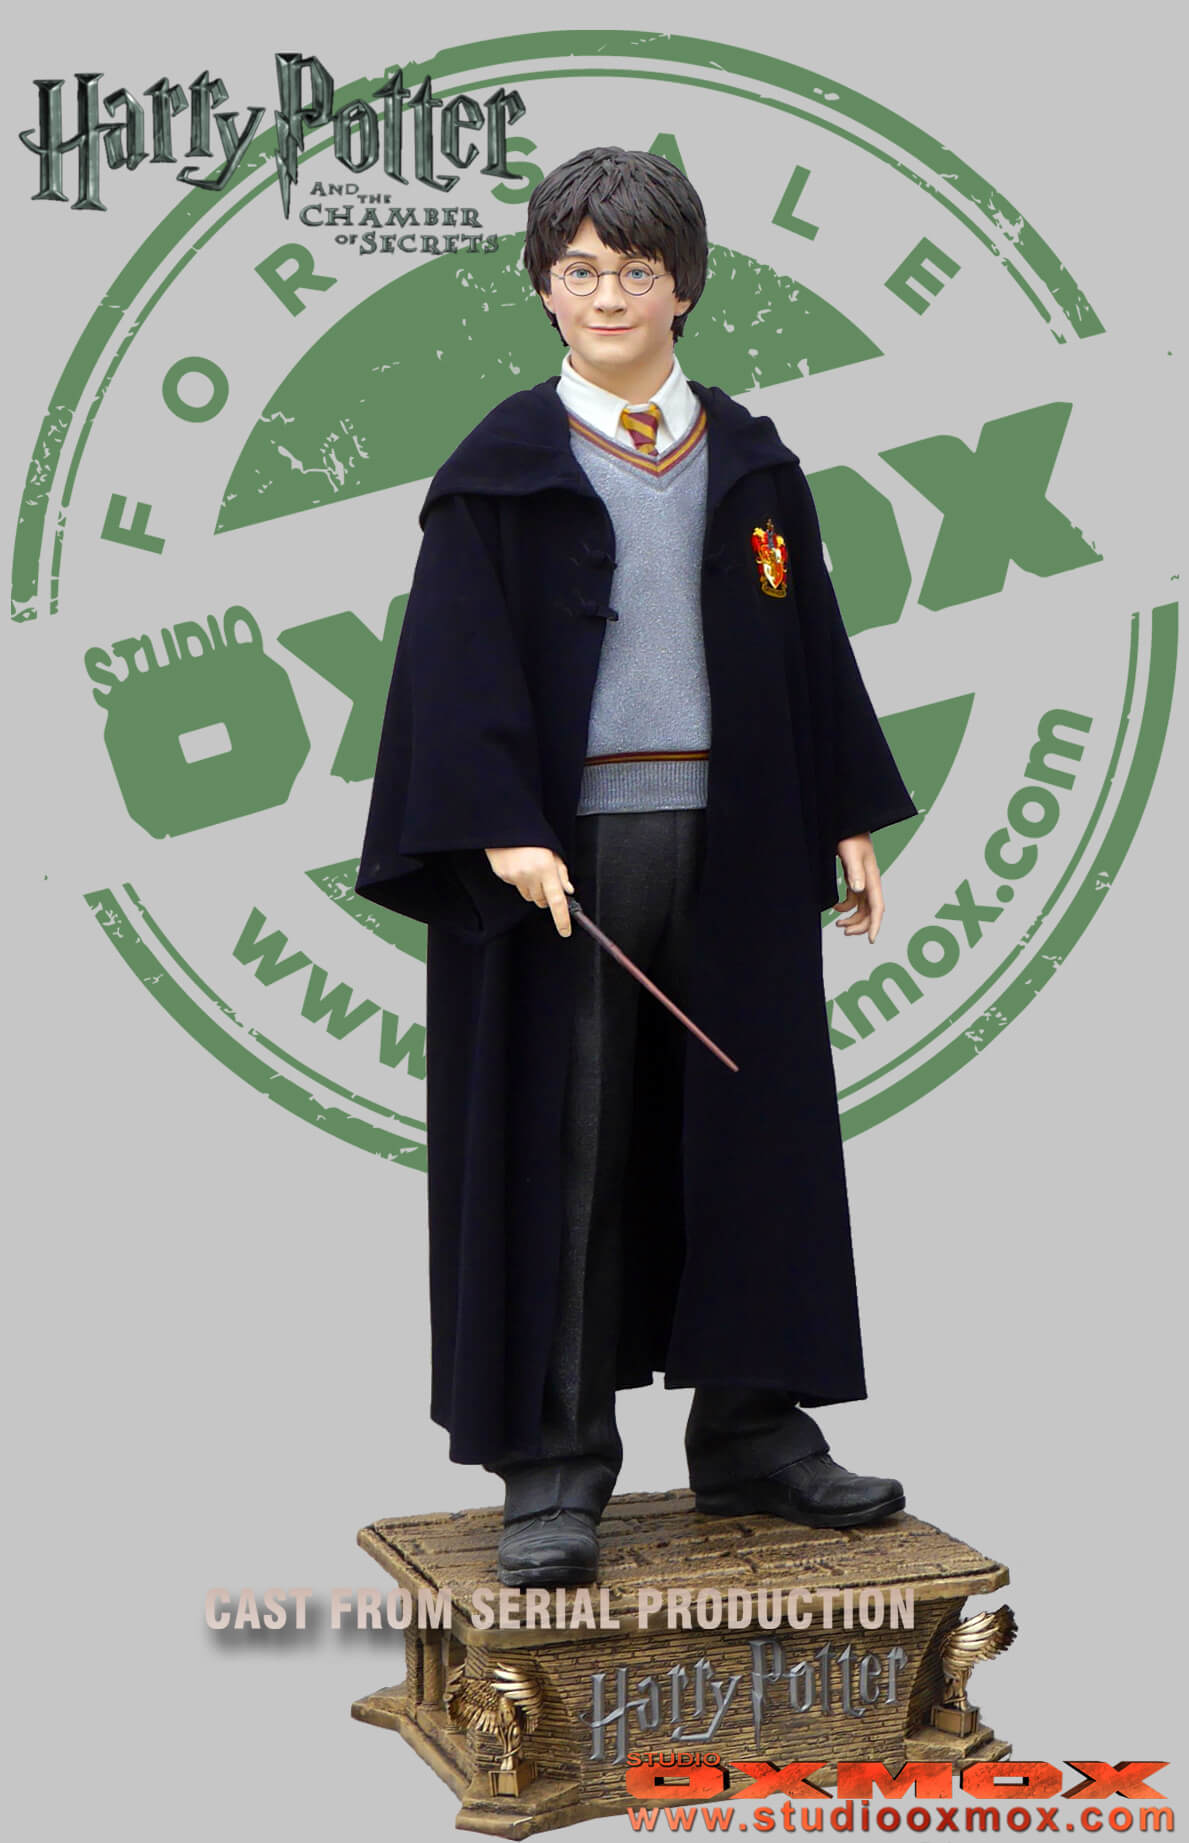 Harry Potter, Chamber of Secrets, life size statue